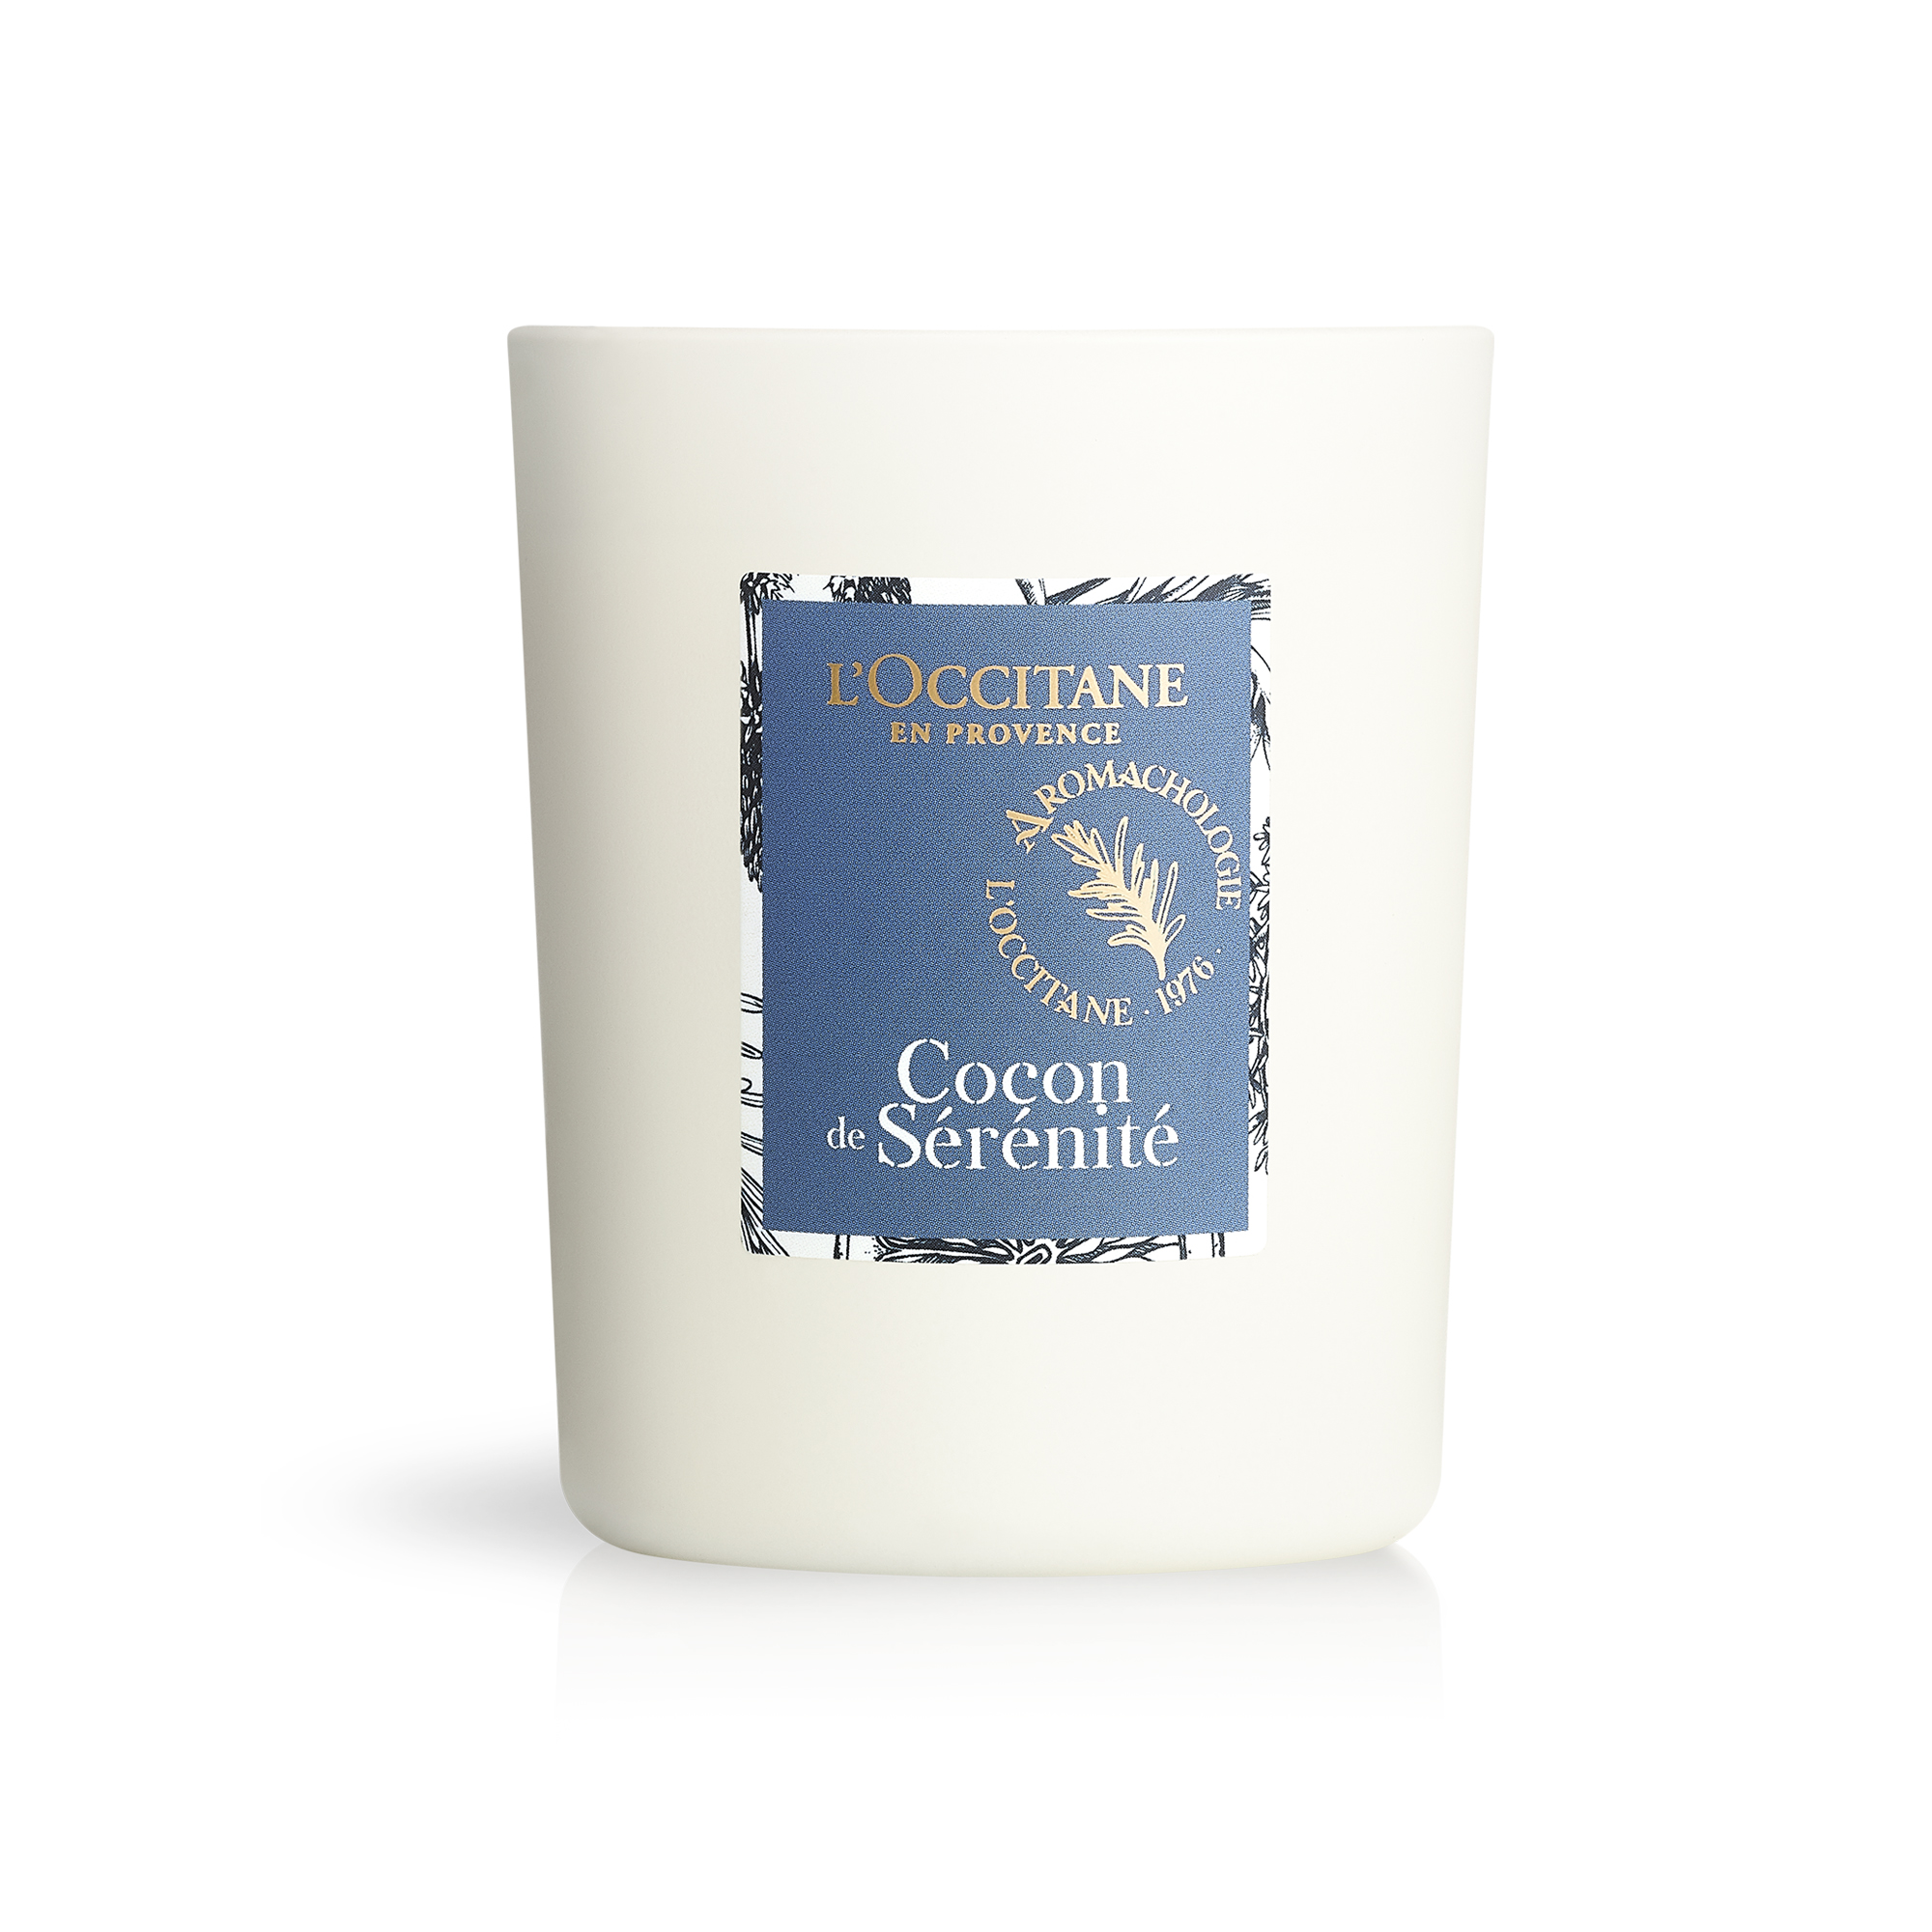 Loccitane Relaxing candle 140g